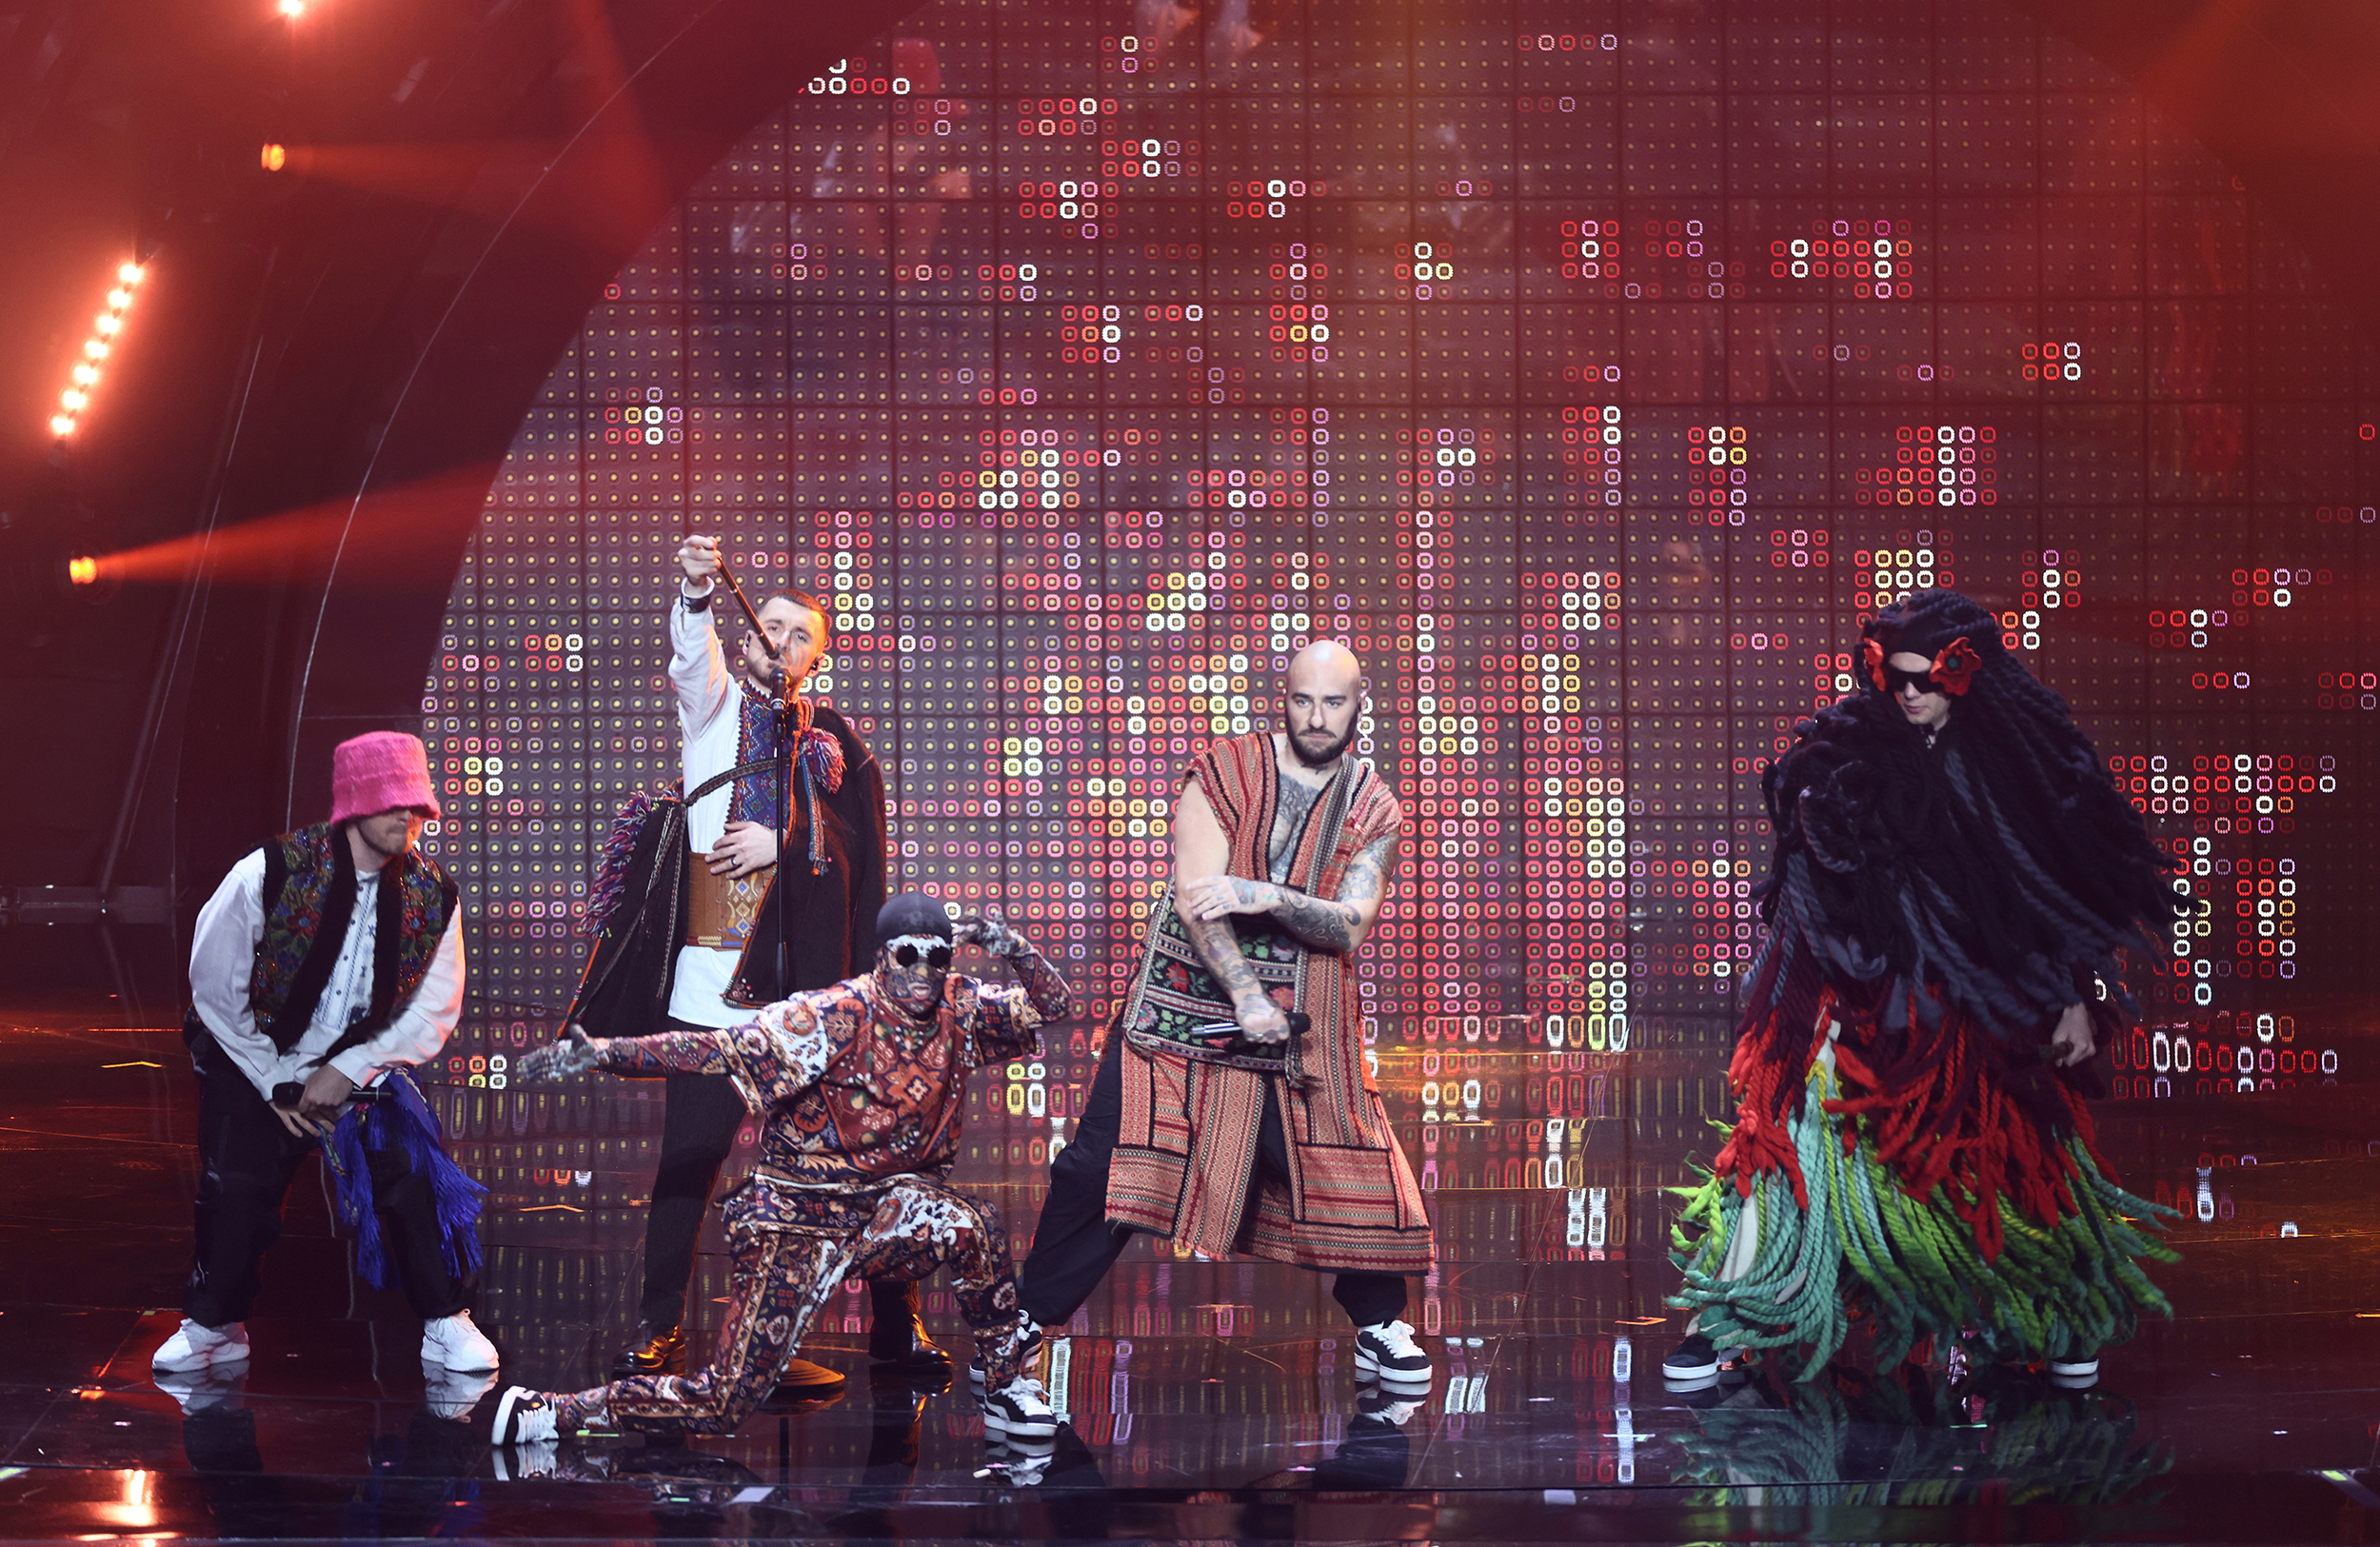 The Kalsuh Orchestra from Ukraine performs with the title Stefania at the first semi-final of the Eurovision Song Contest (ESC). The international music competition is taking place for the 66th time. In the first semifinal, participants from 17 countries will play music to reach the final. The first ten will advance. 